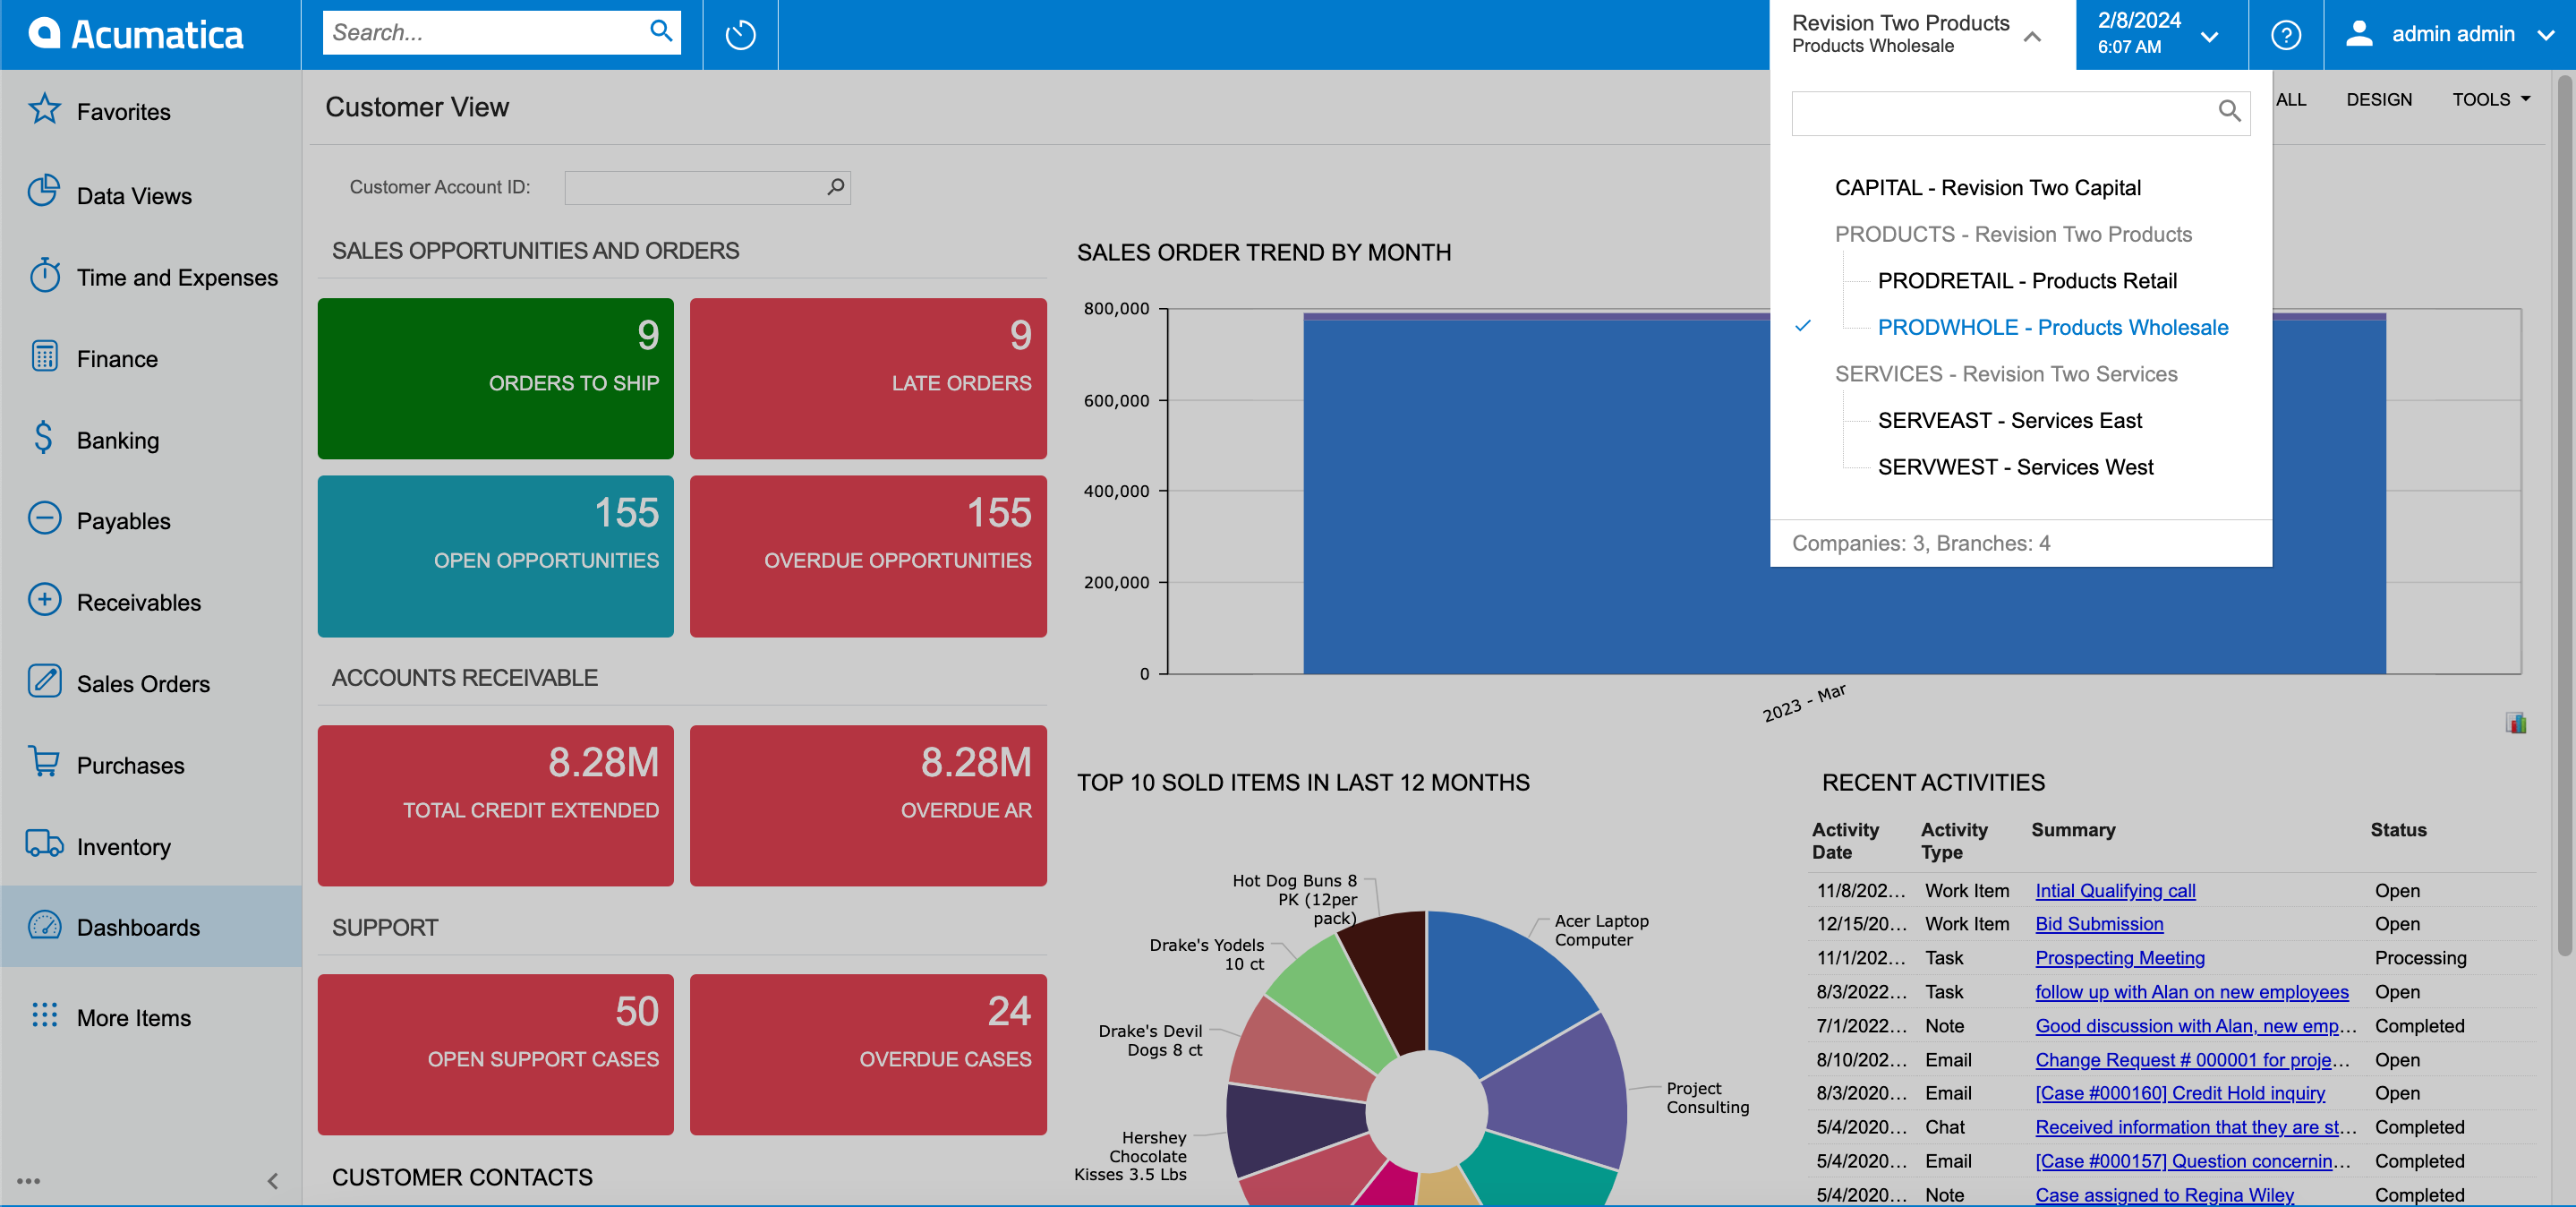 Acumatica ERP. Customer View Dashboard. Branches and tenants dropdown